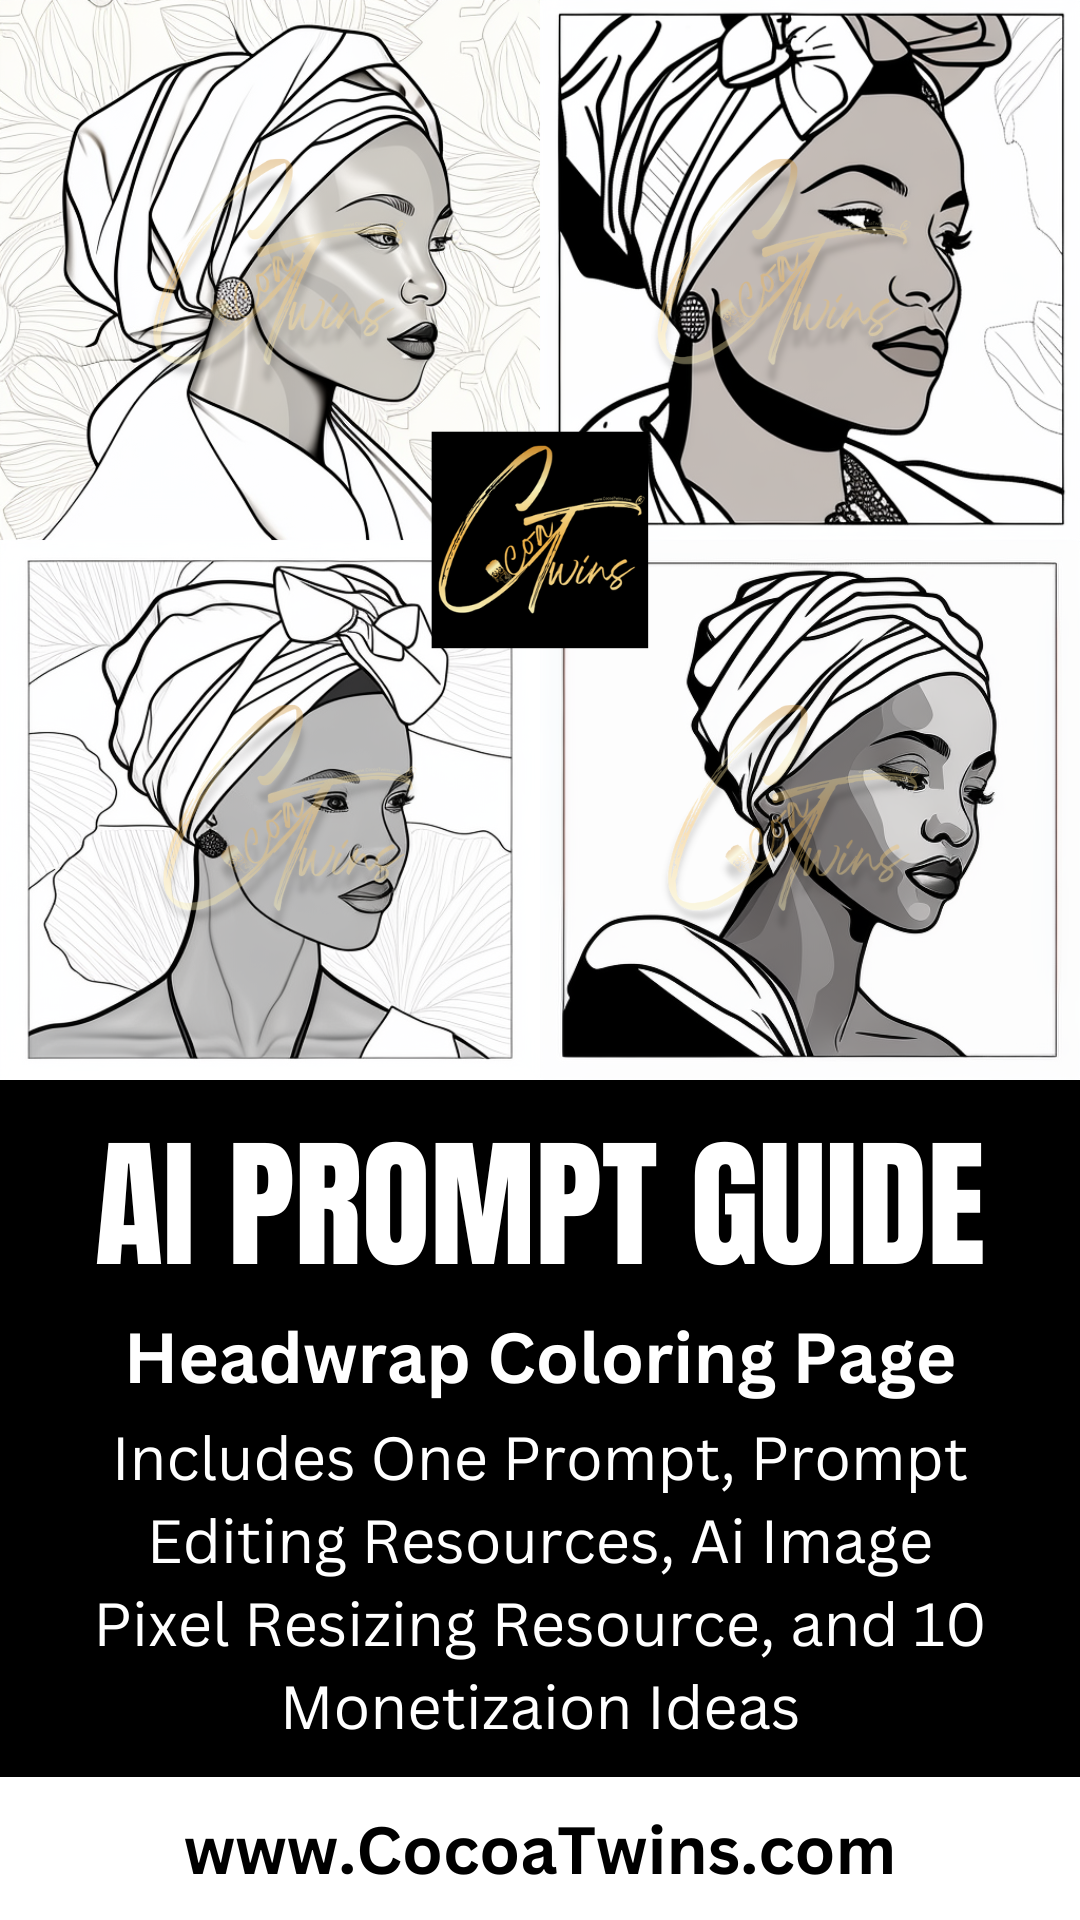 Single MidJourney Prompt Guide -  Headwrap Coloring Page